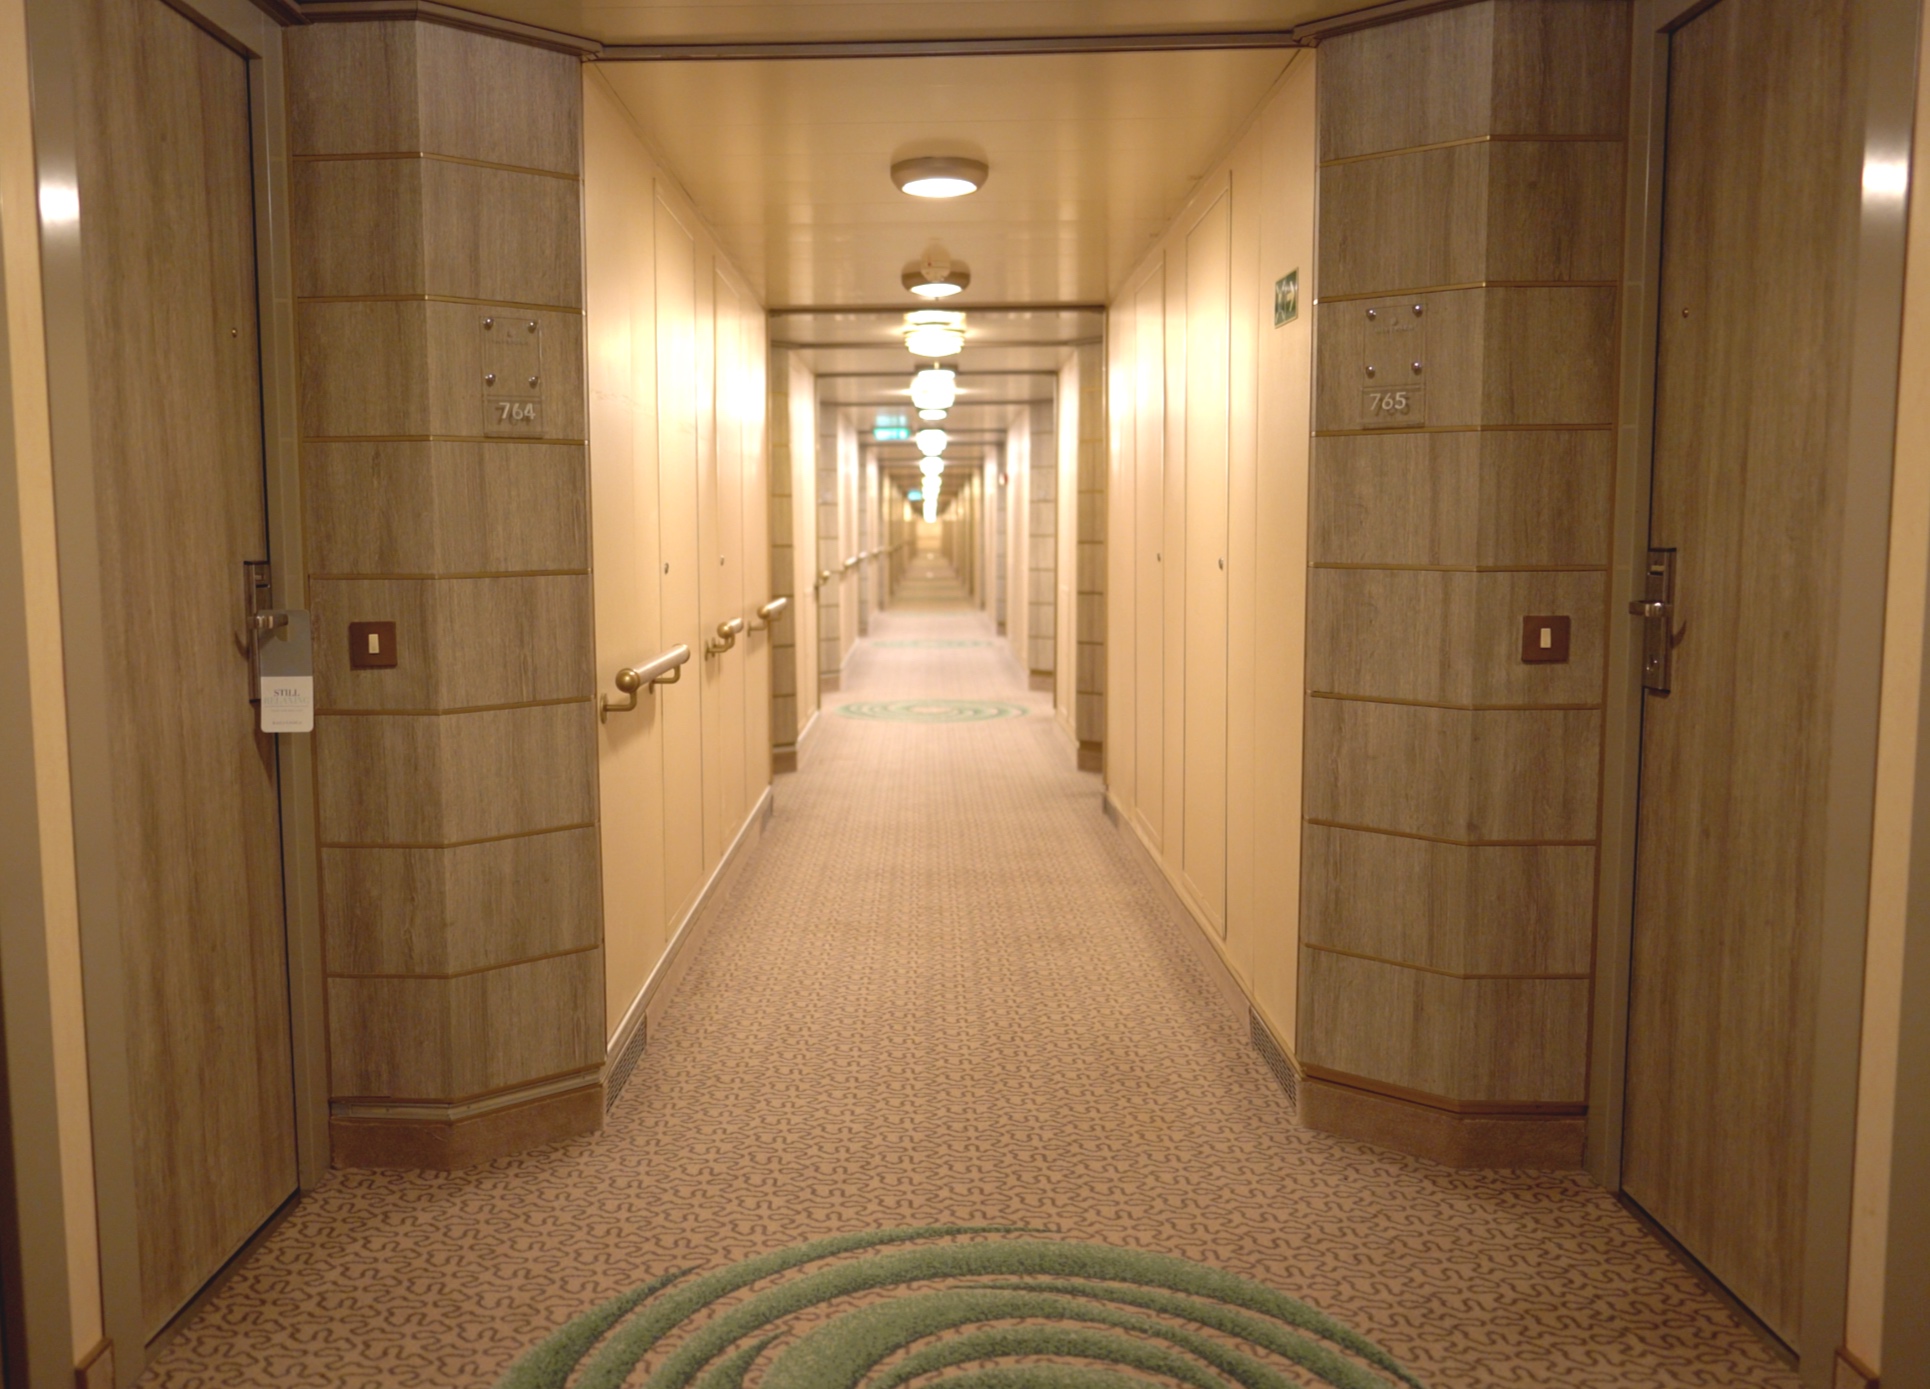 Our suite was almost at the end of this long corridor. 